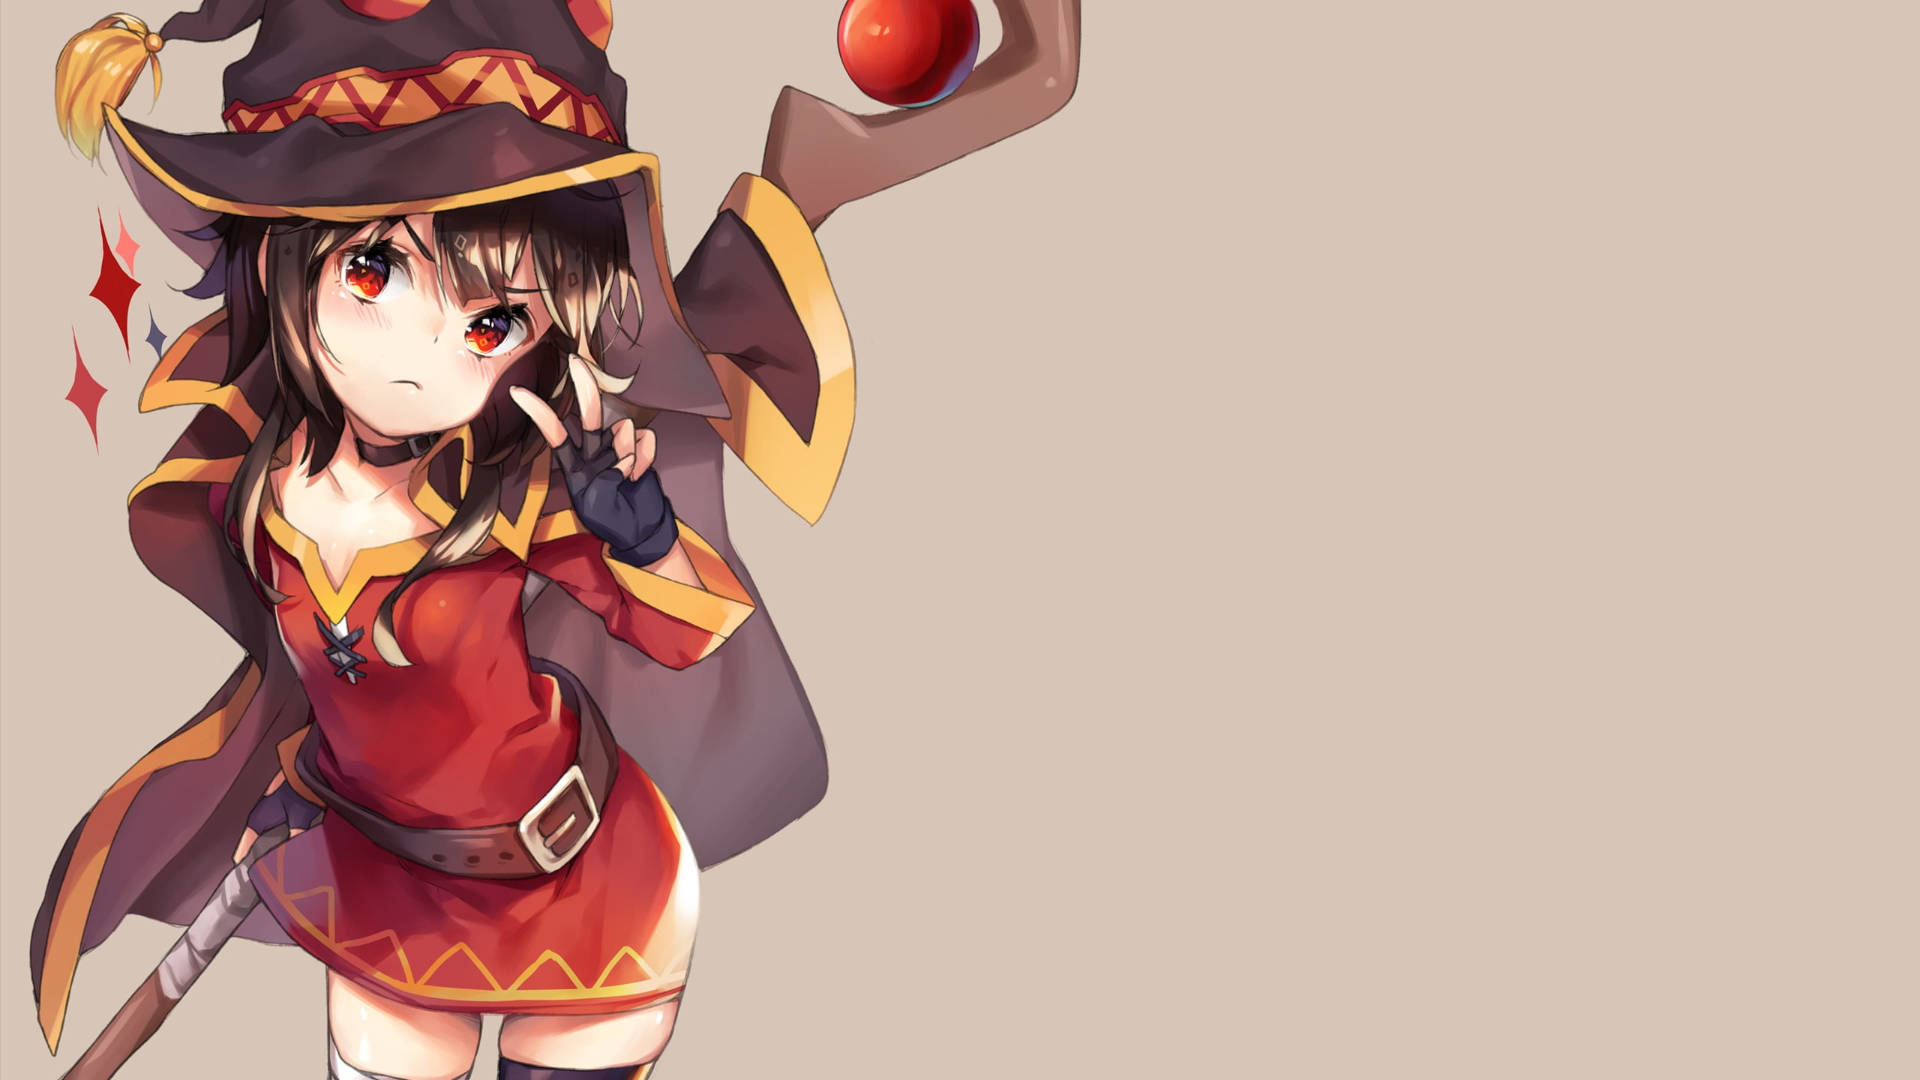 Witchy Anime Cute Girl Wallpaper